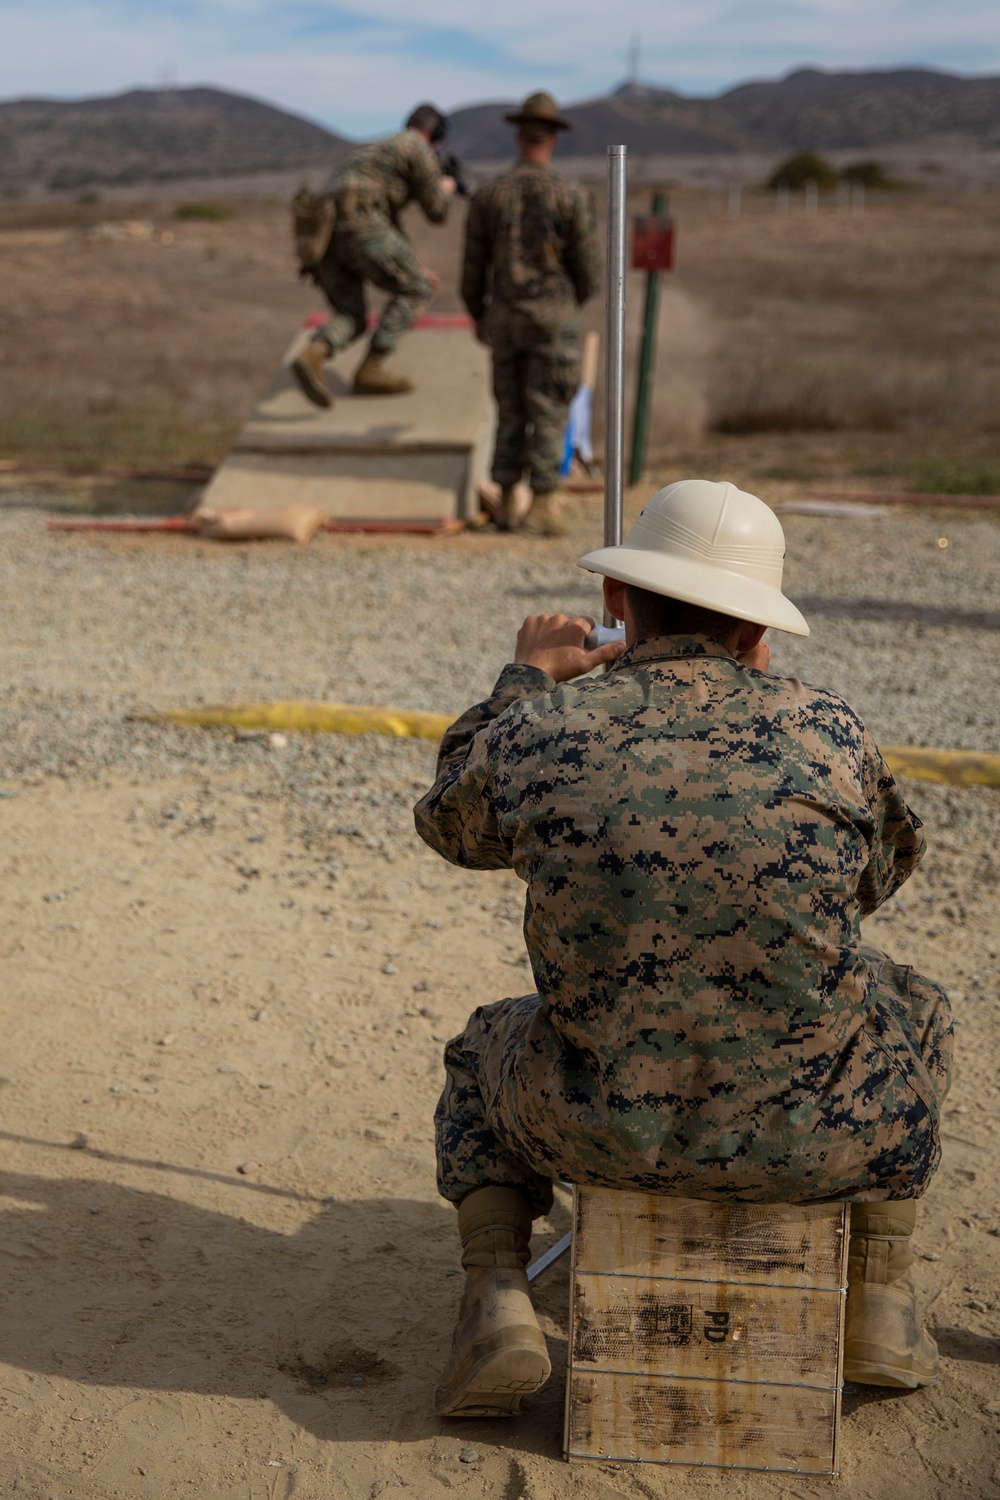 Competition-In-Arms: Pendleton hosts marksmanship competition